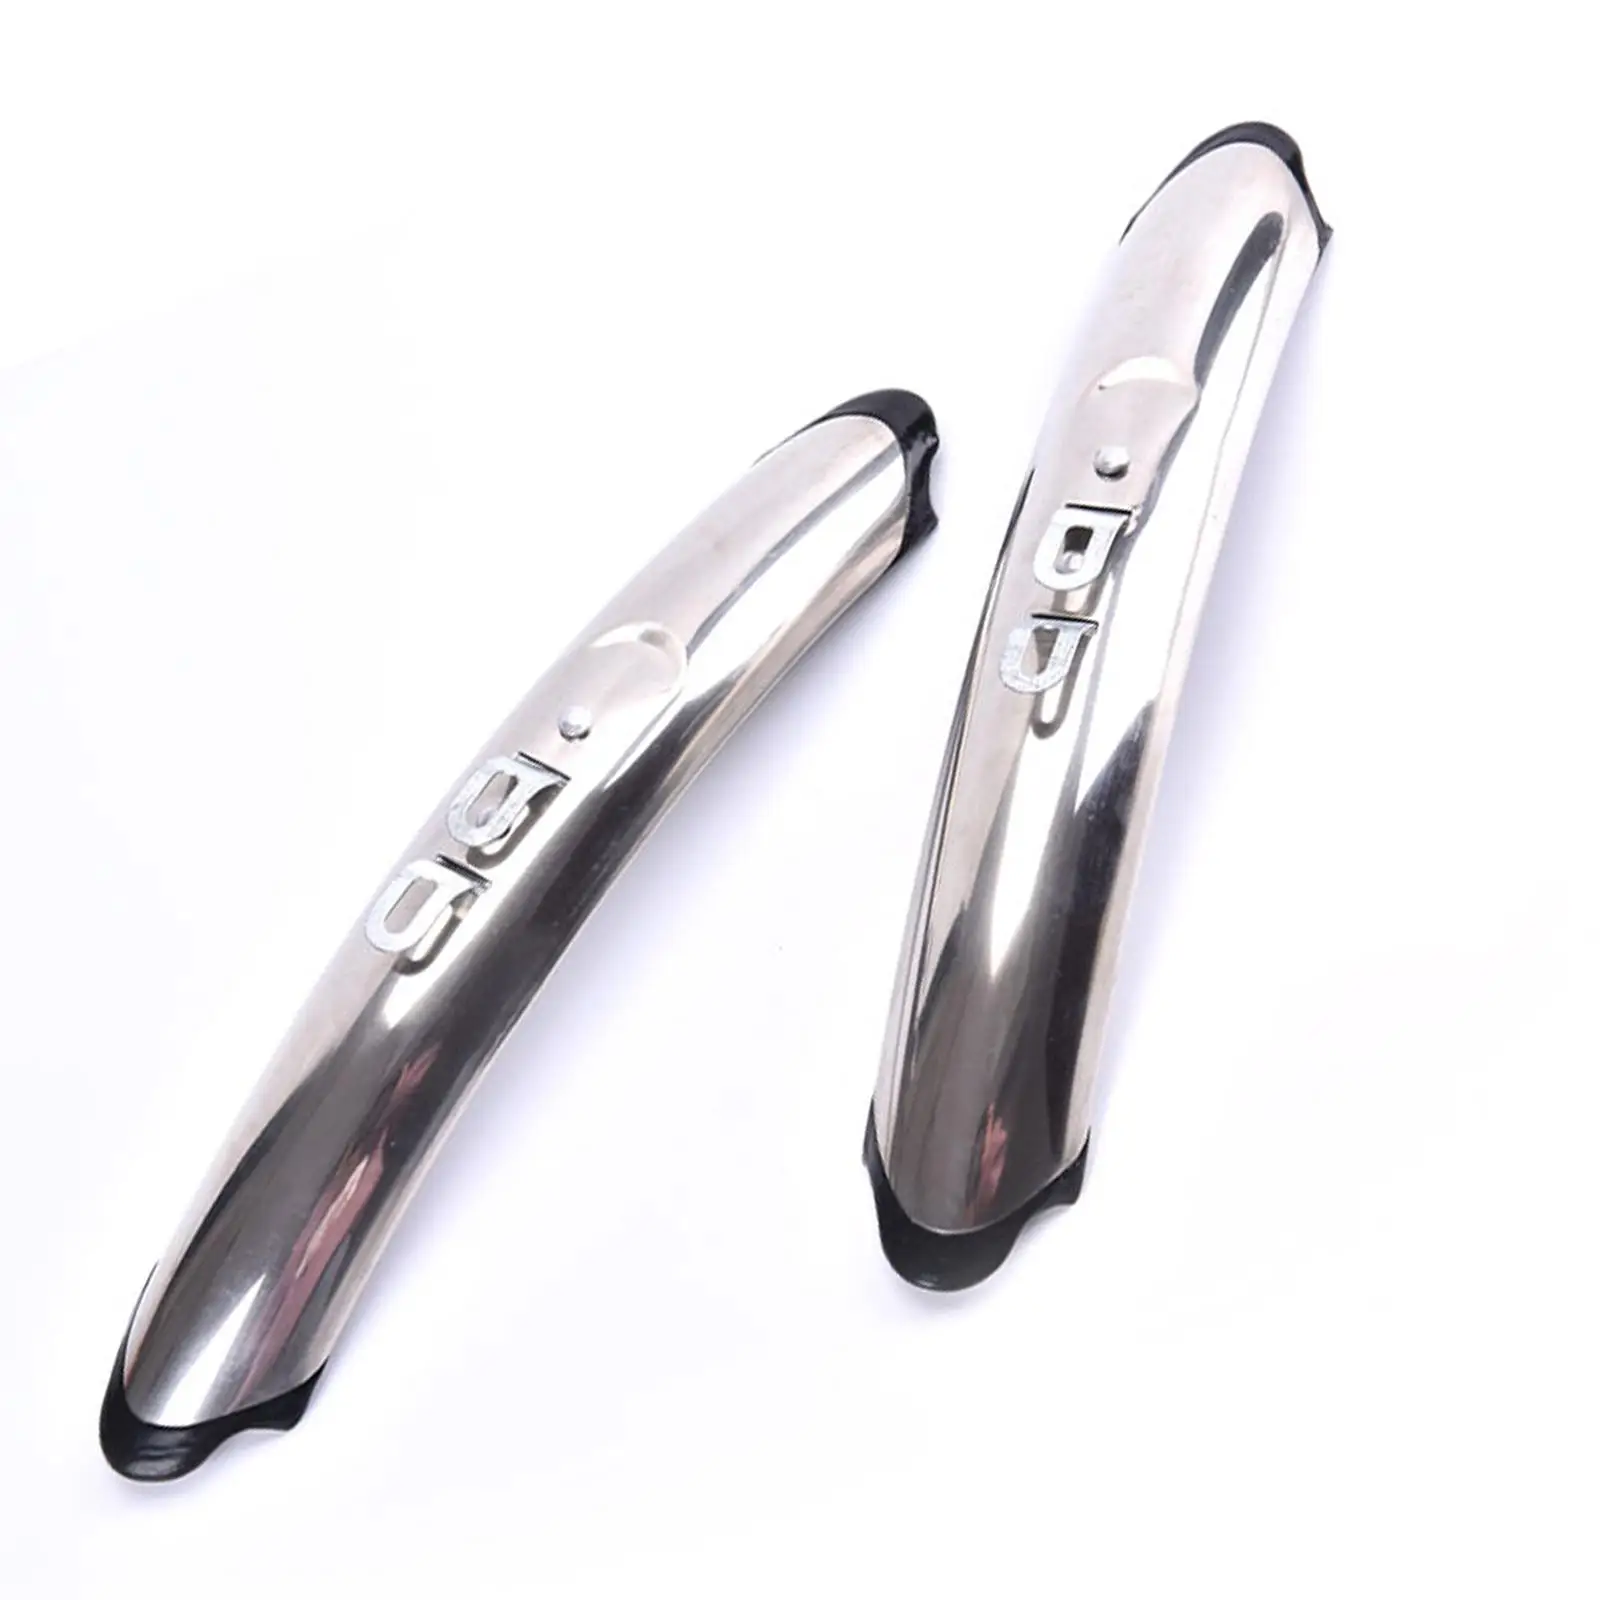 1 Pair Front Rear Fenders 27inch Fittings Stainless Steel for Road Bike